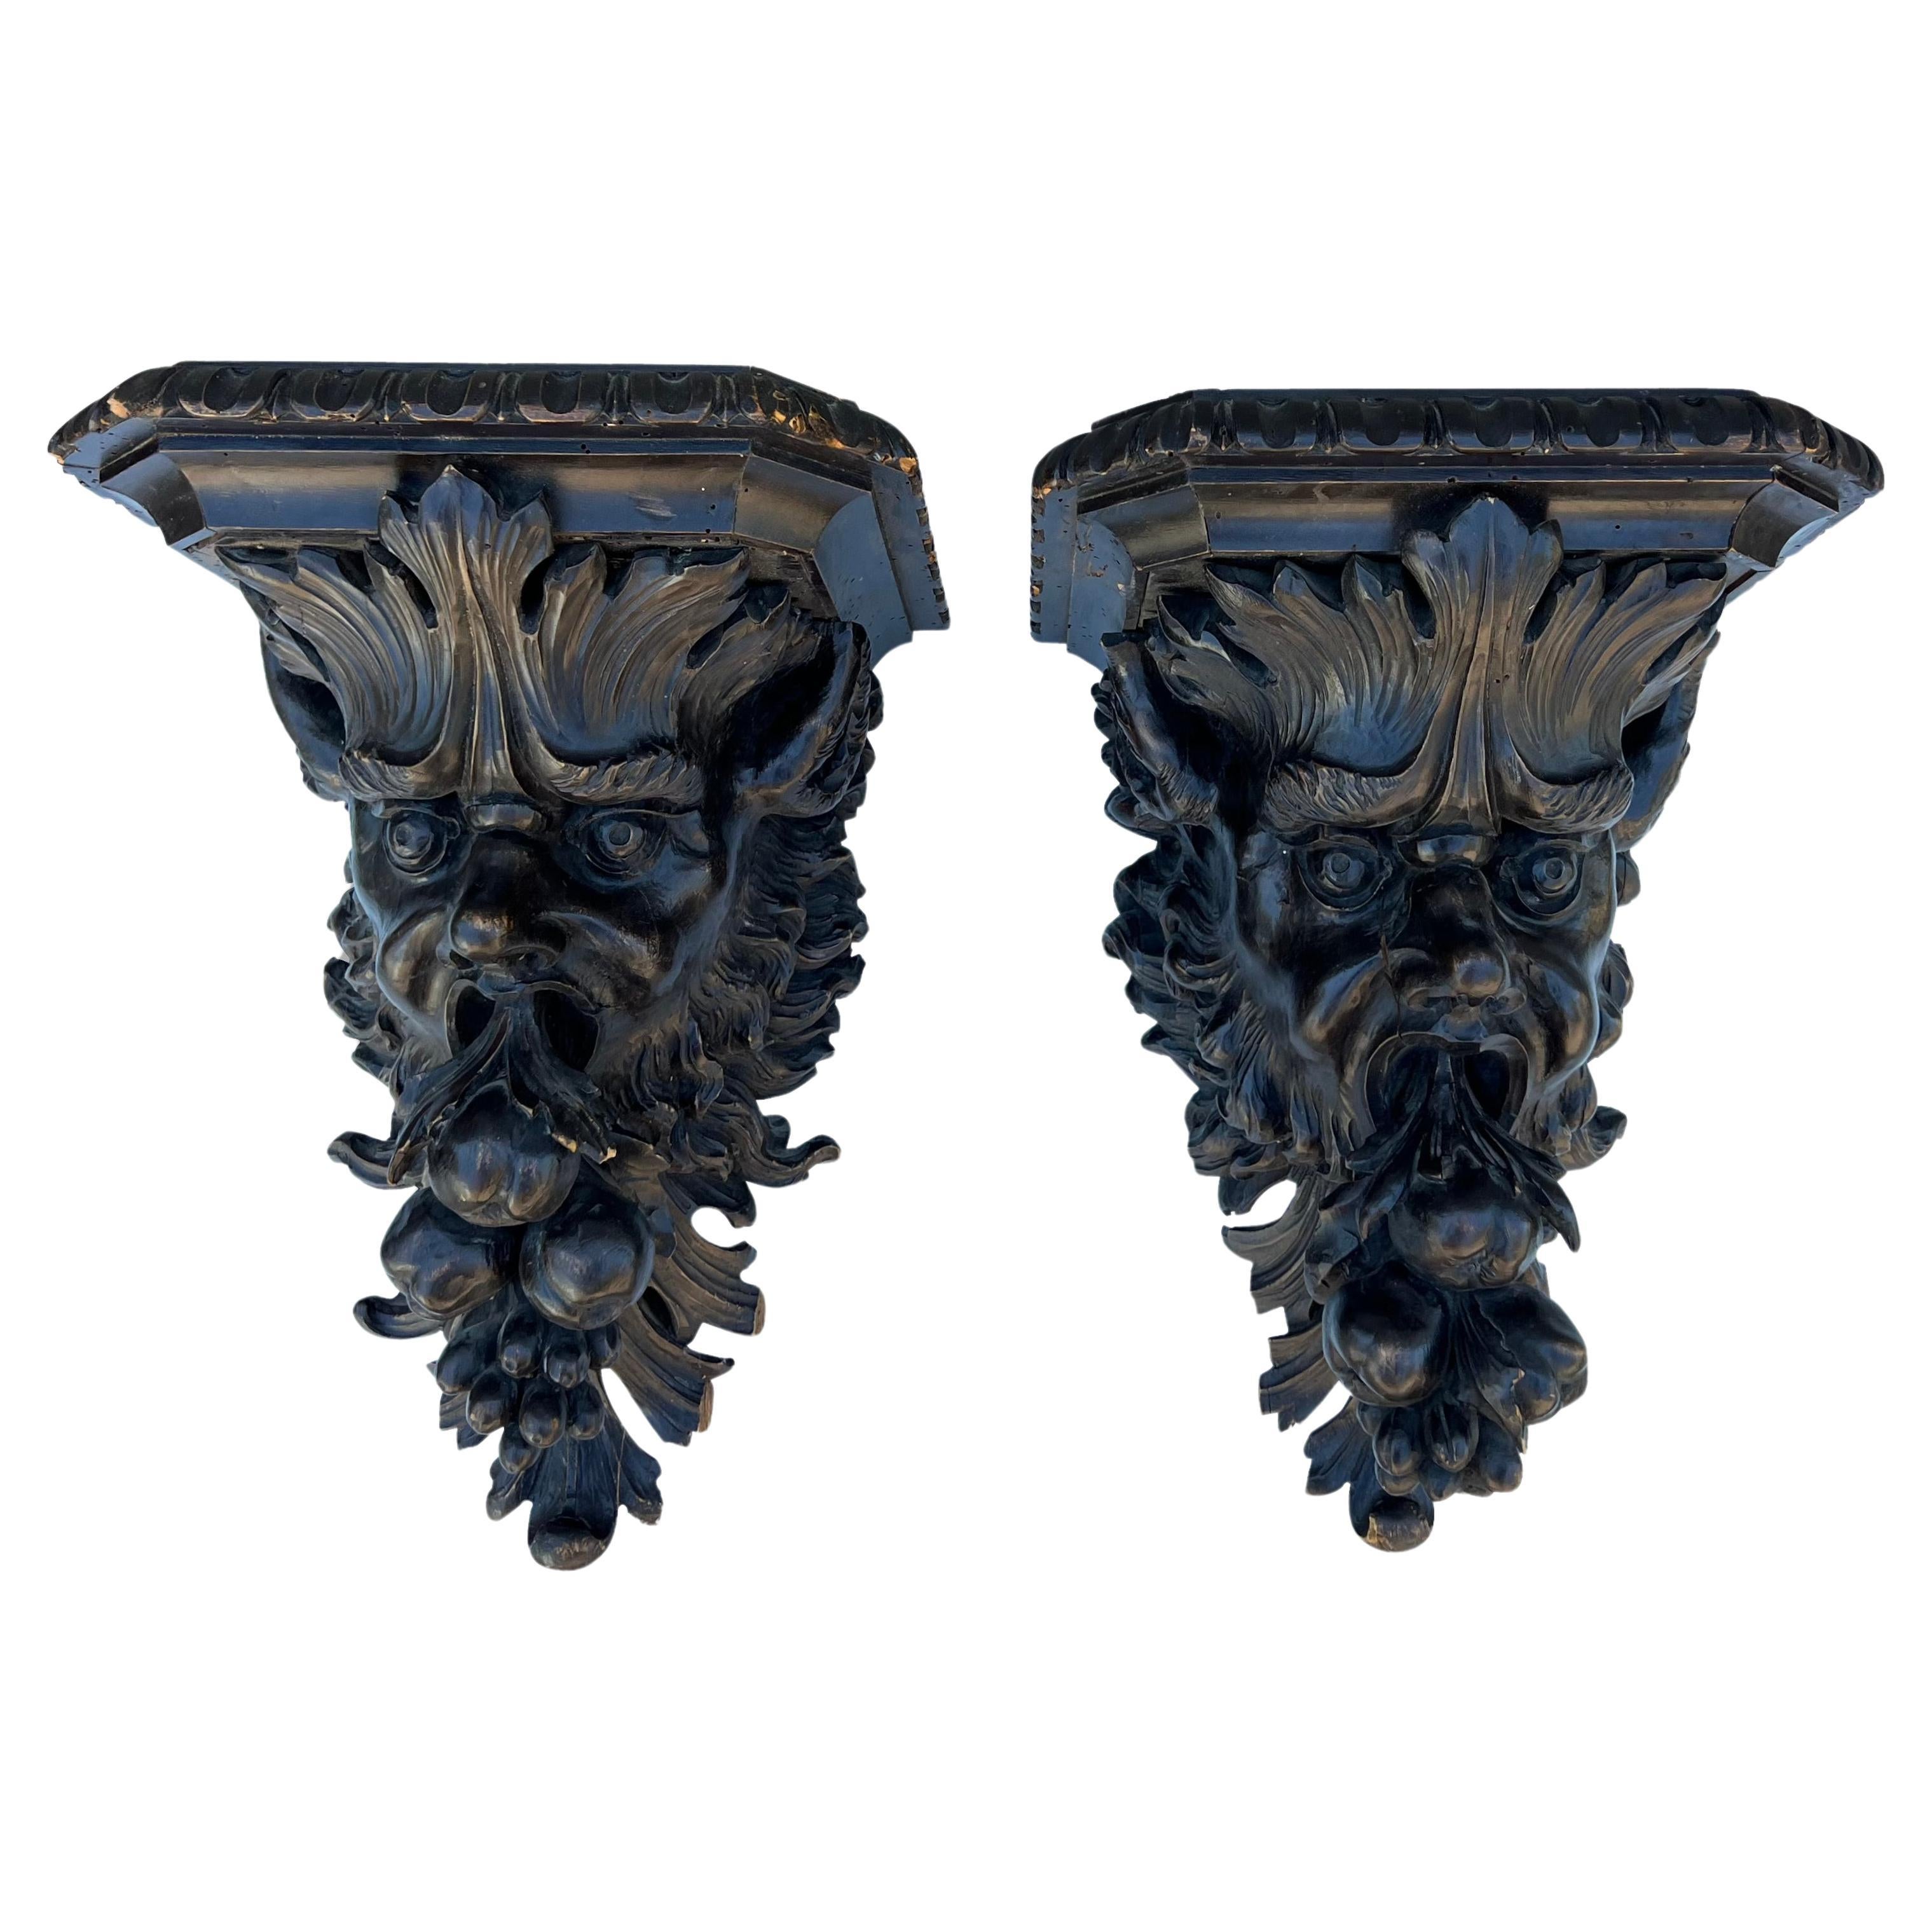 Exceptional Pair of Carved Wall Brackets with Mythological Faces